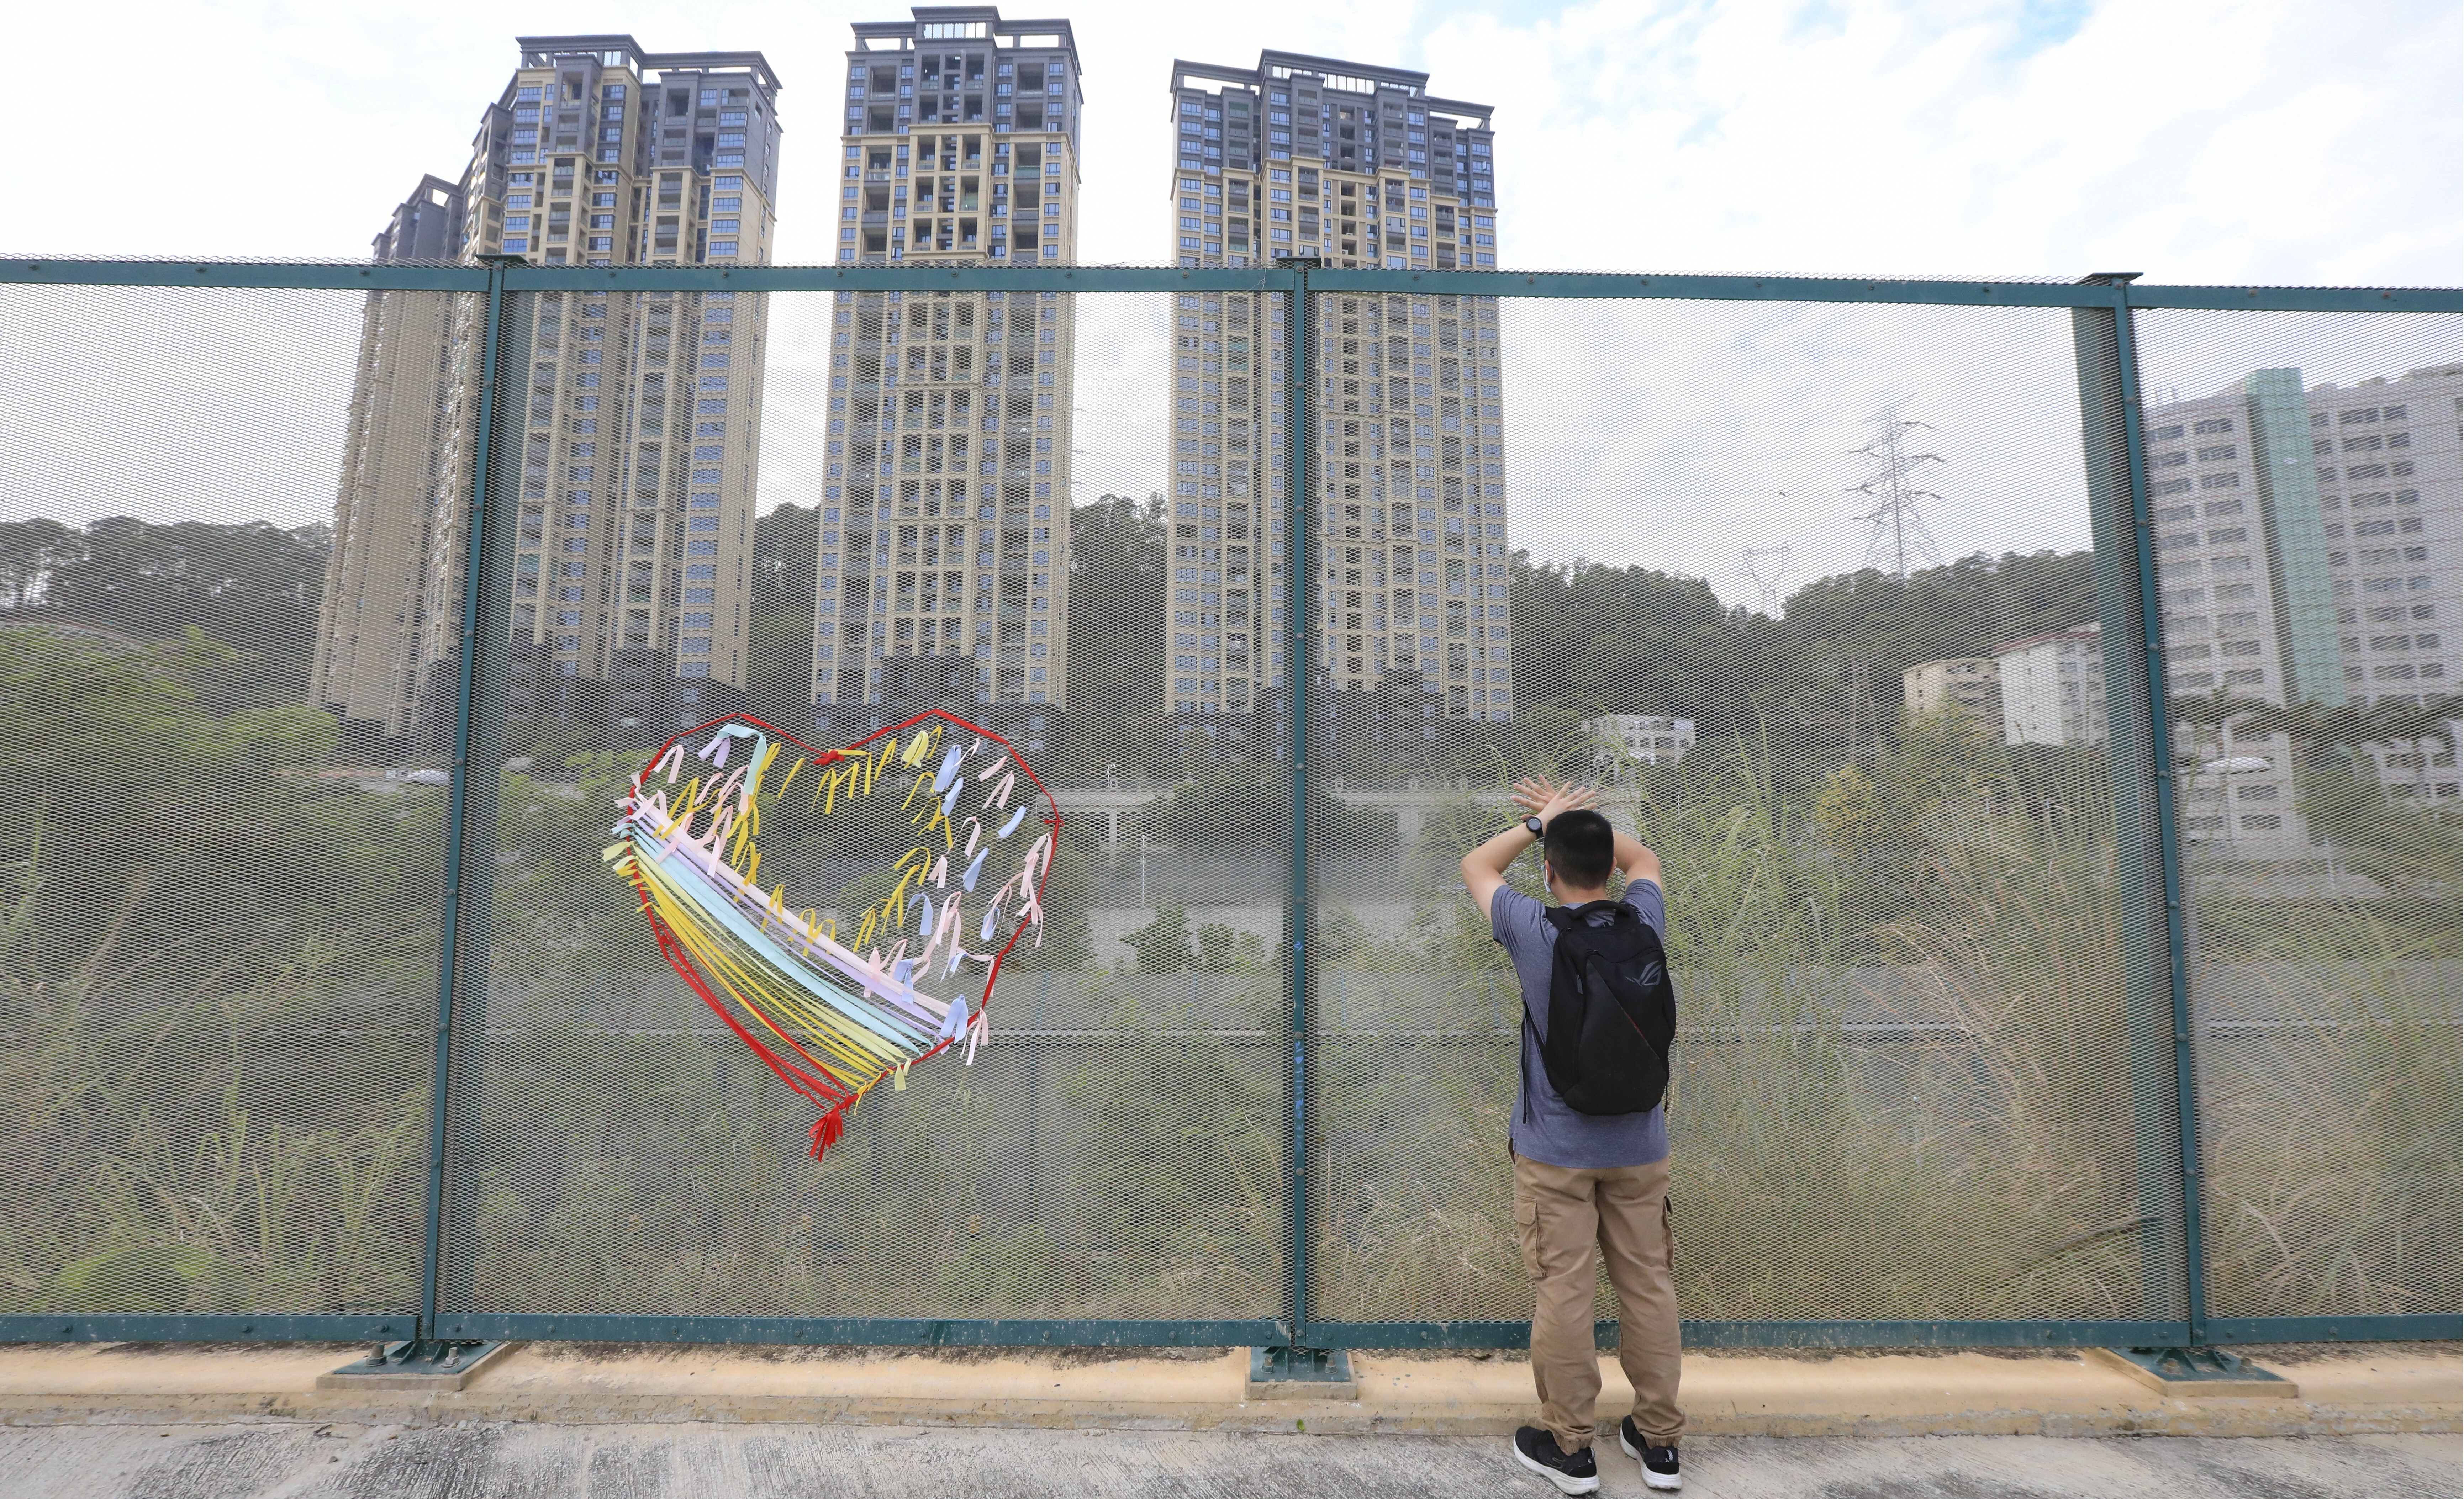 Two barbed wire fences 100 metres apart at the Liantang-Heung Yuen Wai border control point separate couples and families living in Hong Kong and on mainland China. Photo: Felix Wong